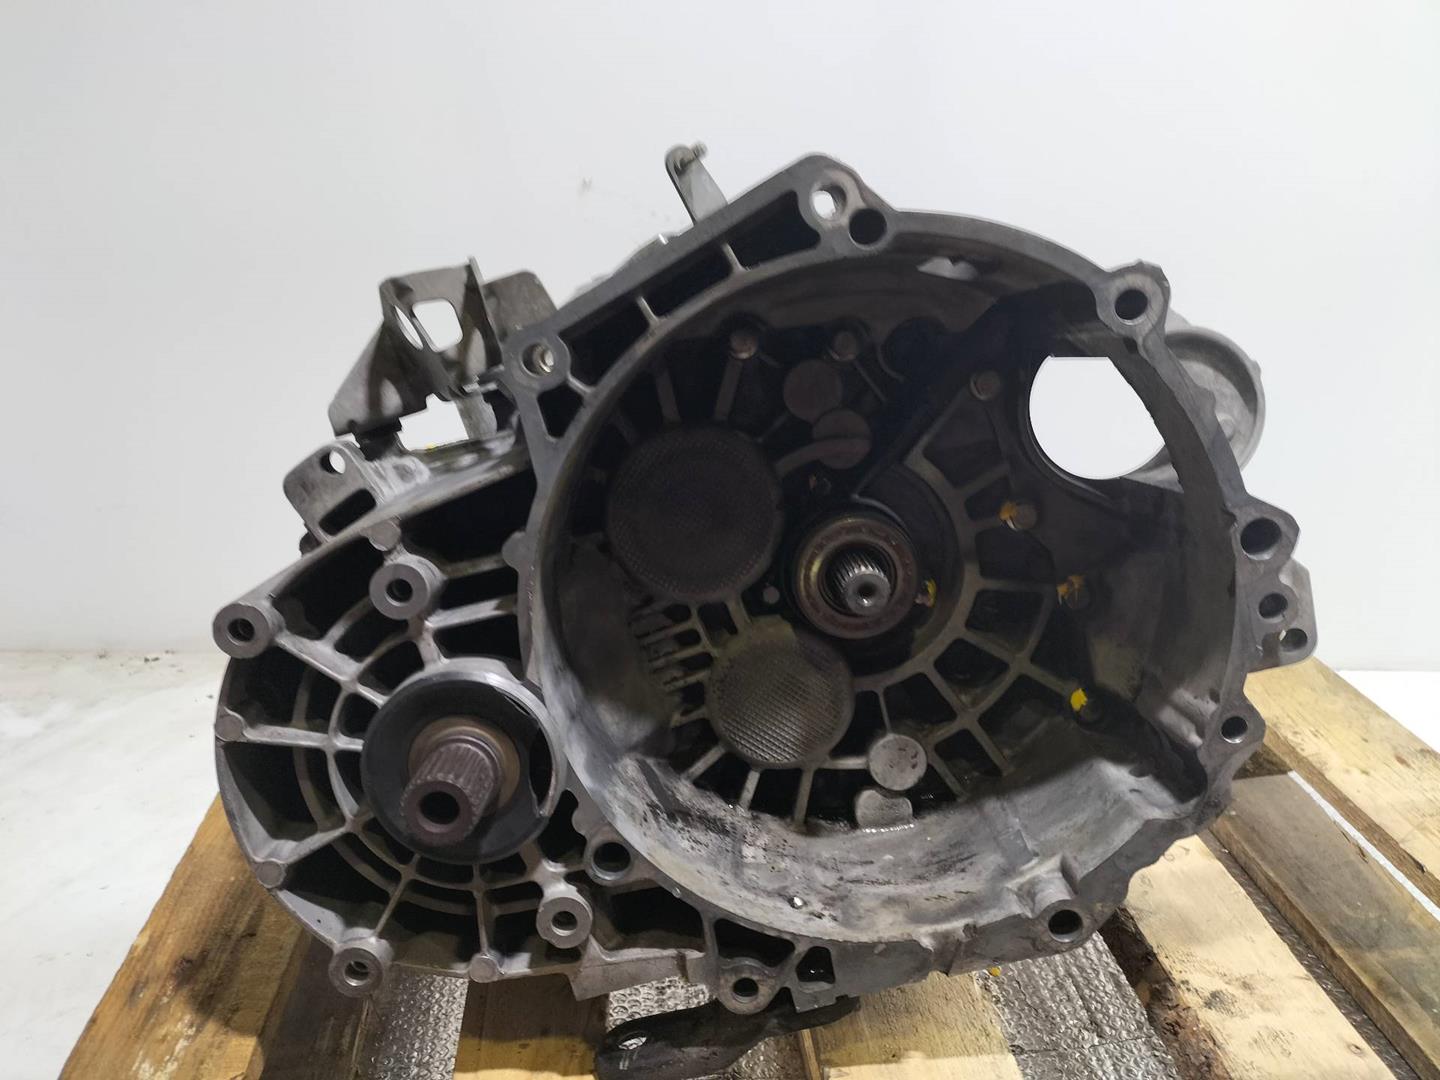 AUDI A3 (8P1) Gearbox GRF, 6VELOCIDADES 19220066